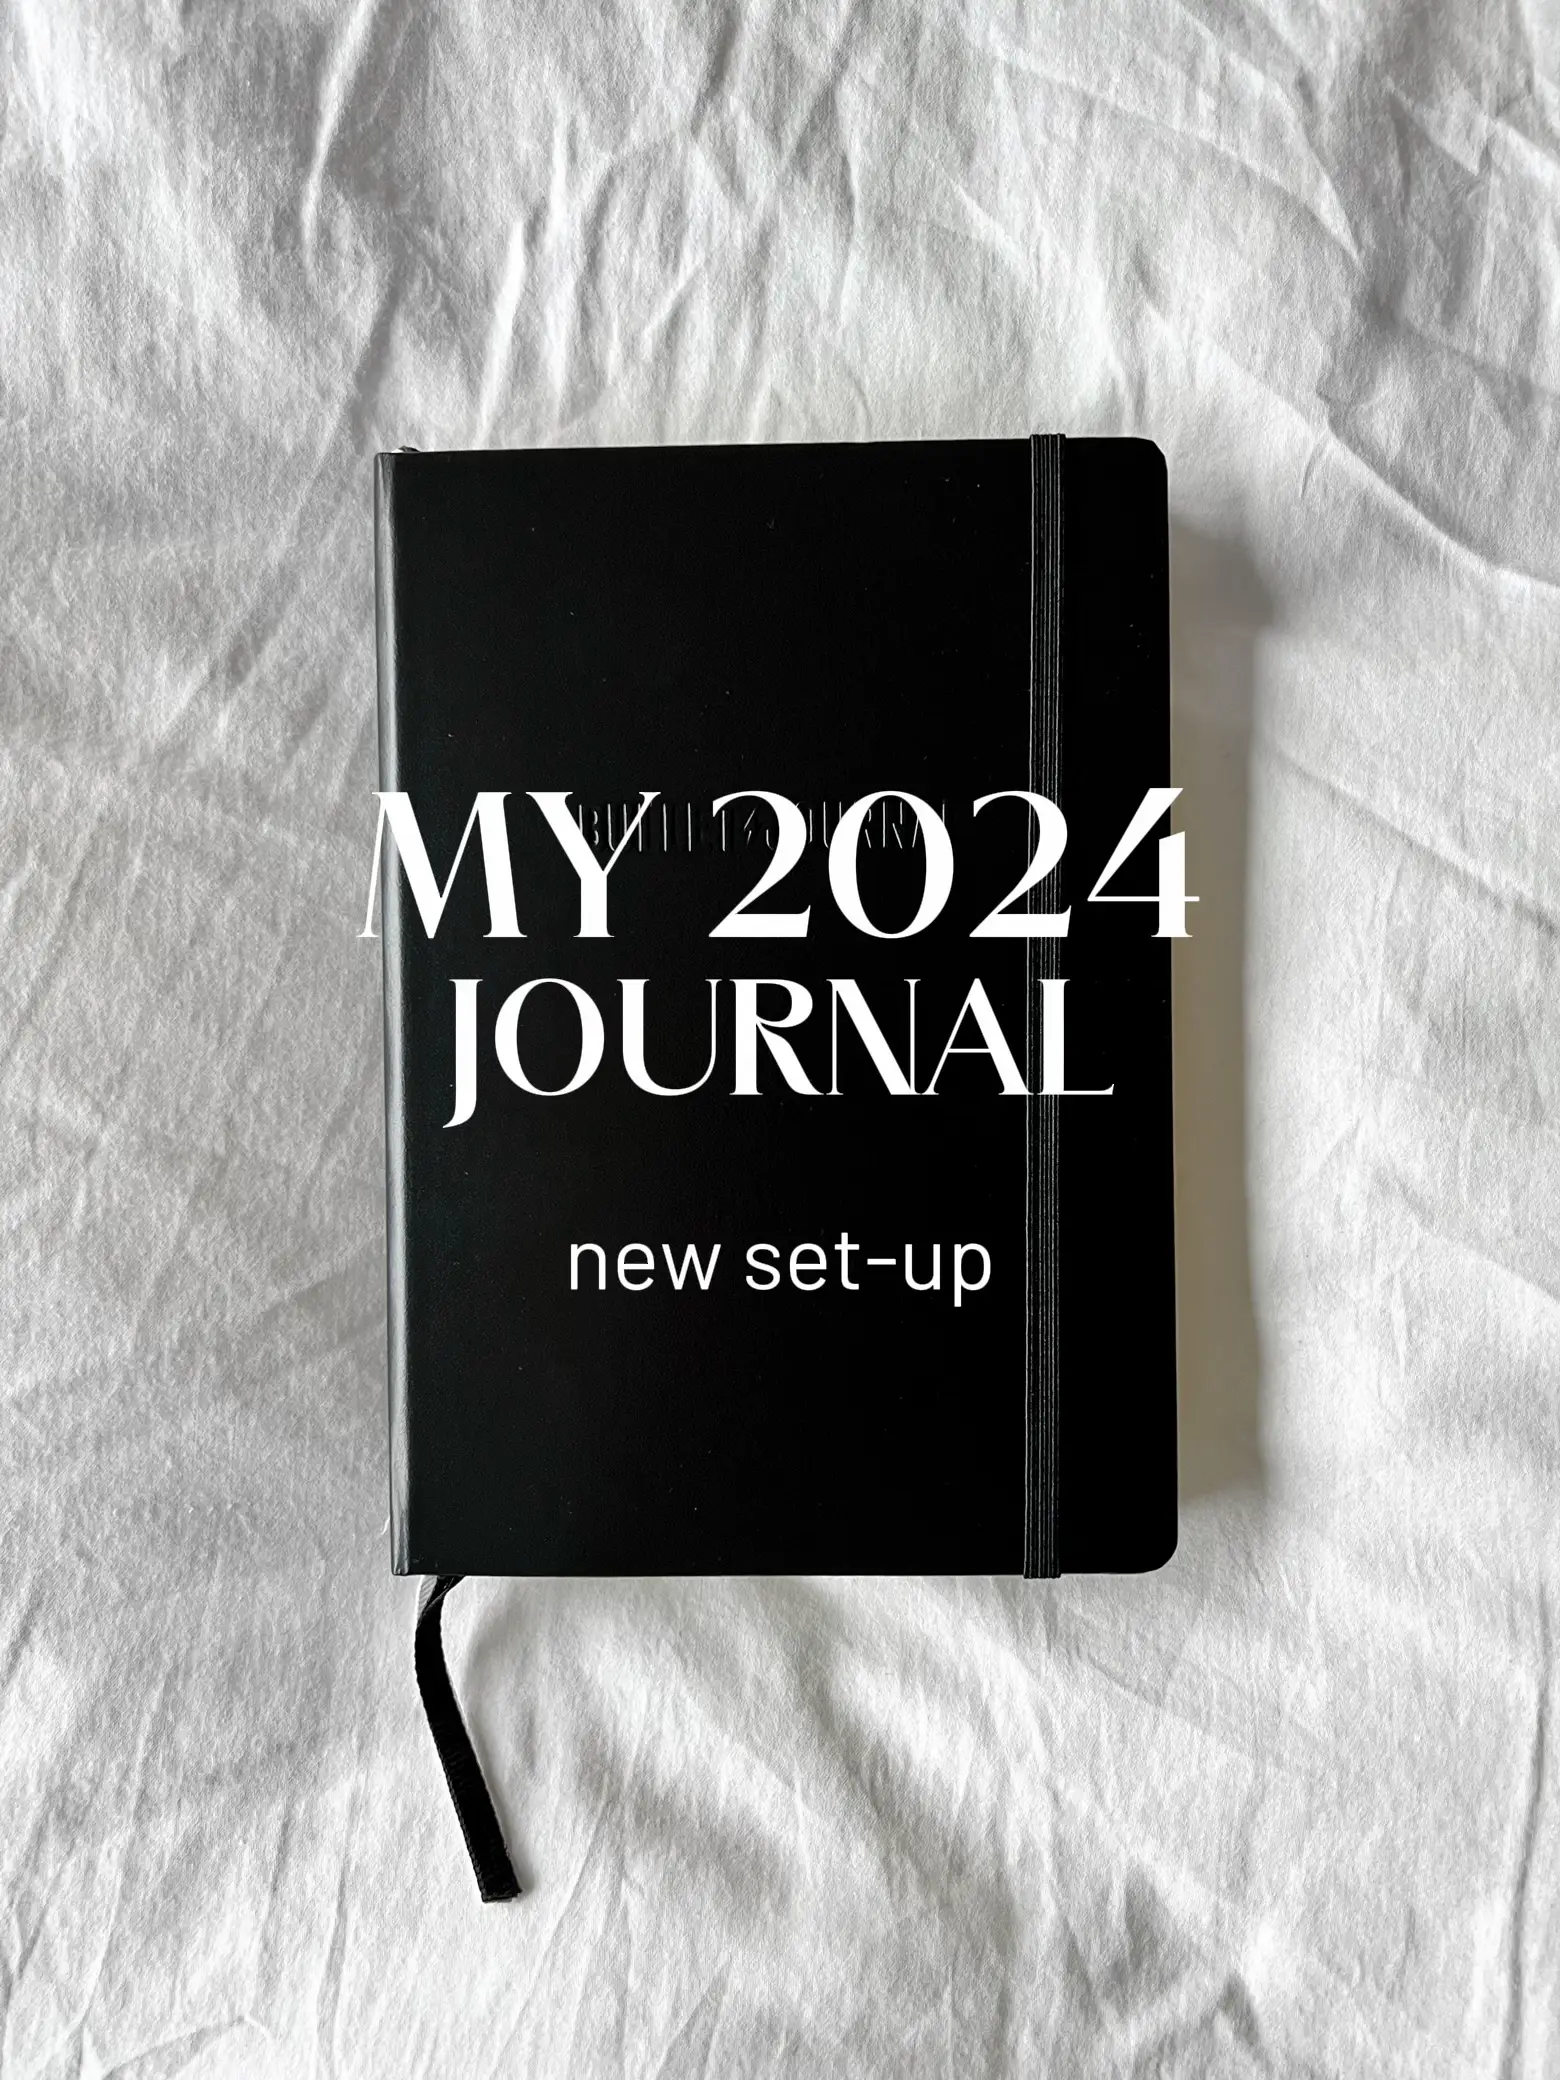 Update: My first attempt in my 2024 Blacked out Journal! Thanks